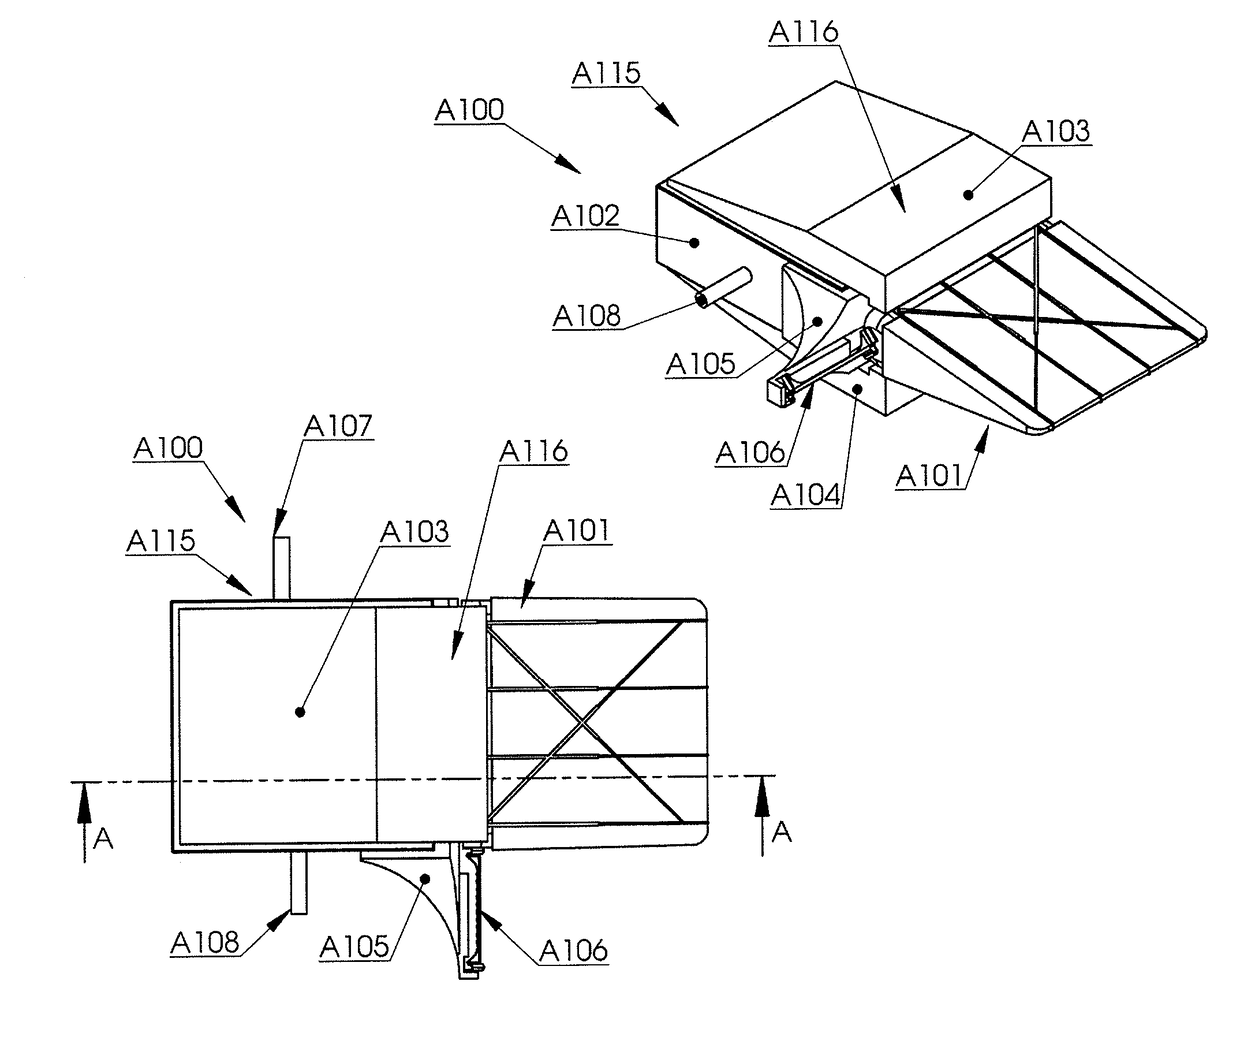 Hinge systems for audio transducers and audio transducers or devices incorporating the same